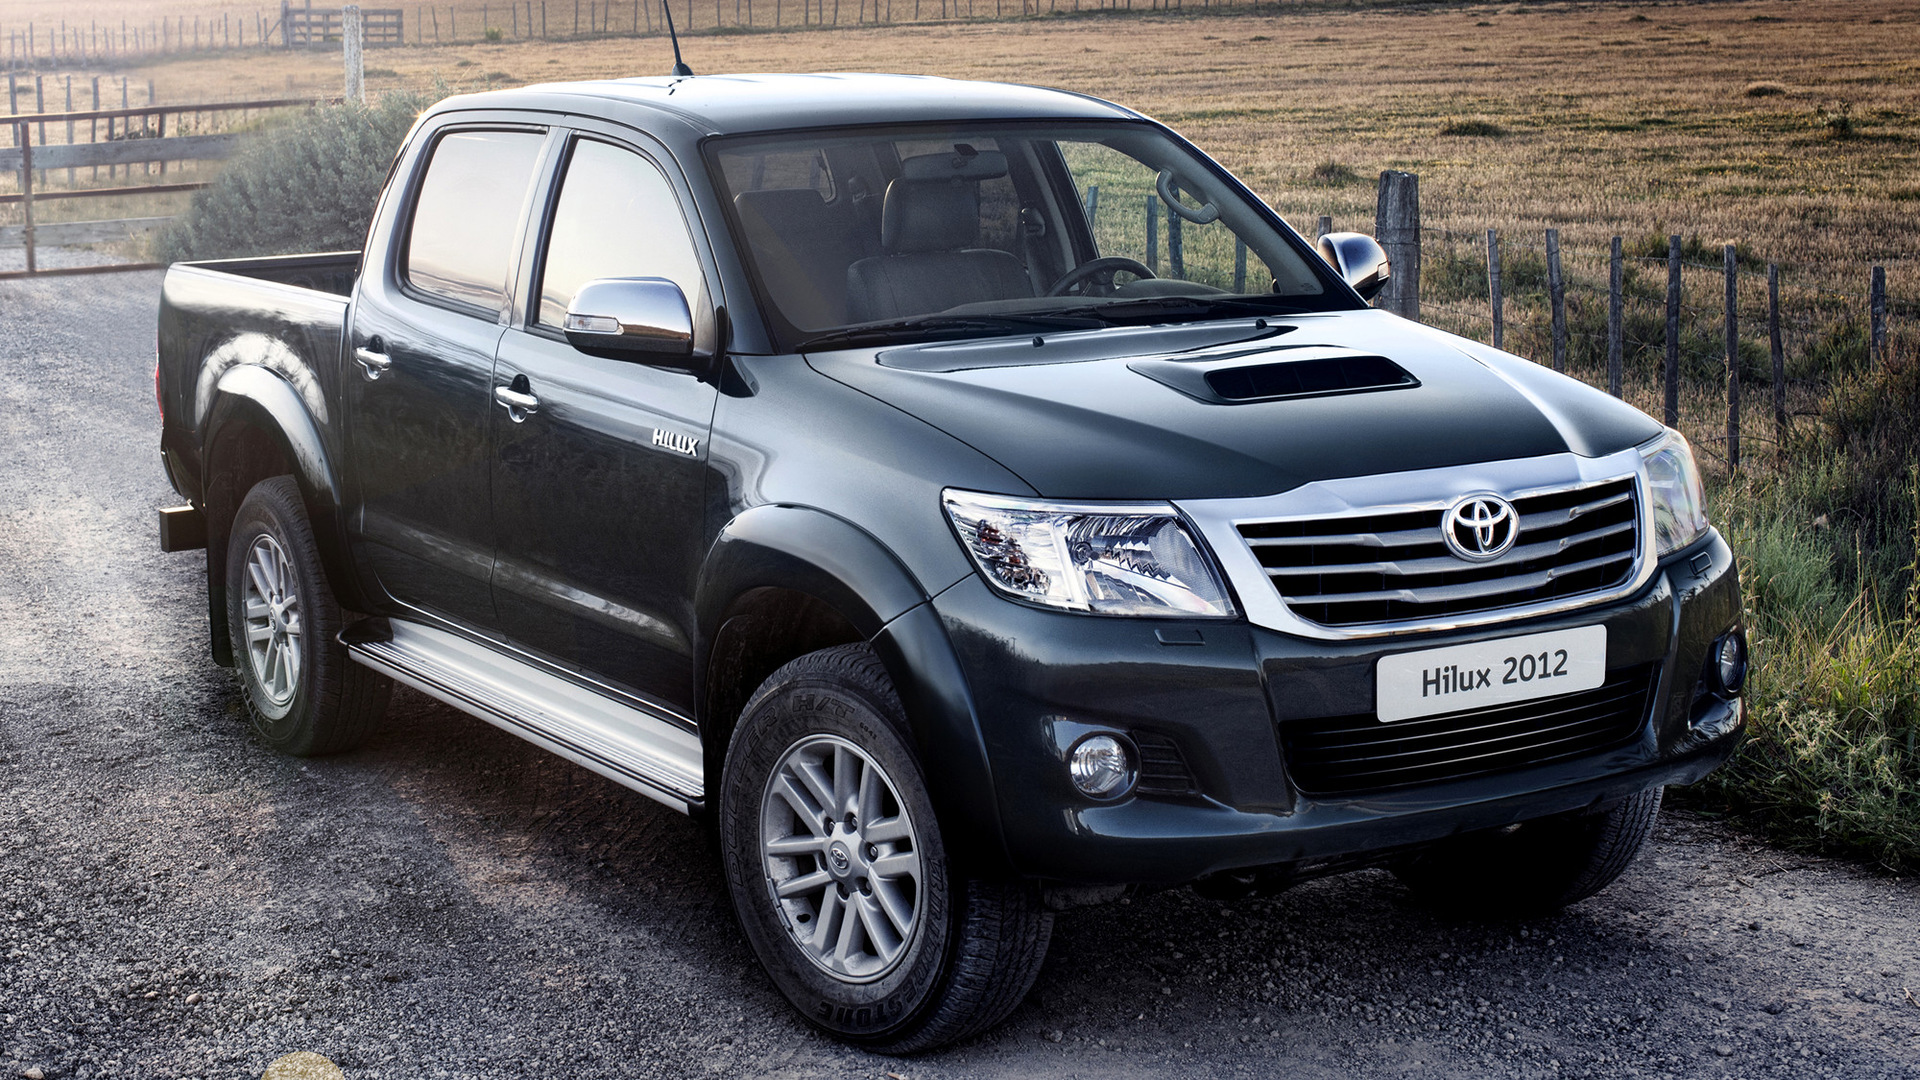 2011 Toyota Hilux Double Cab Wallpapers and HD Images 